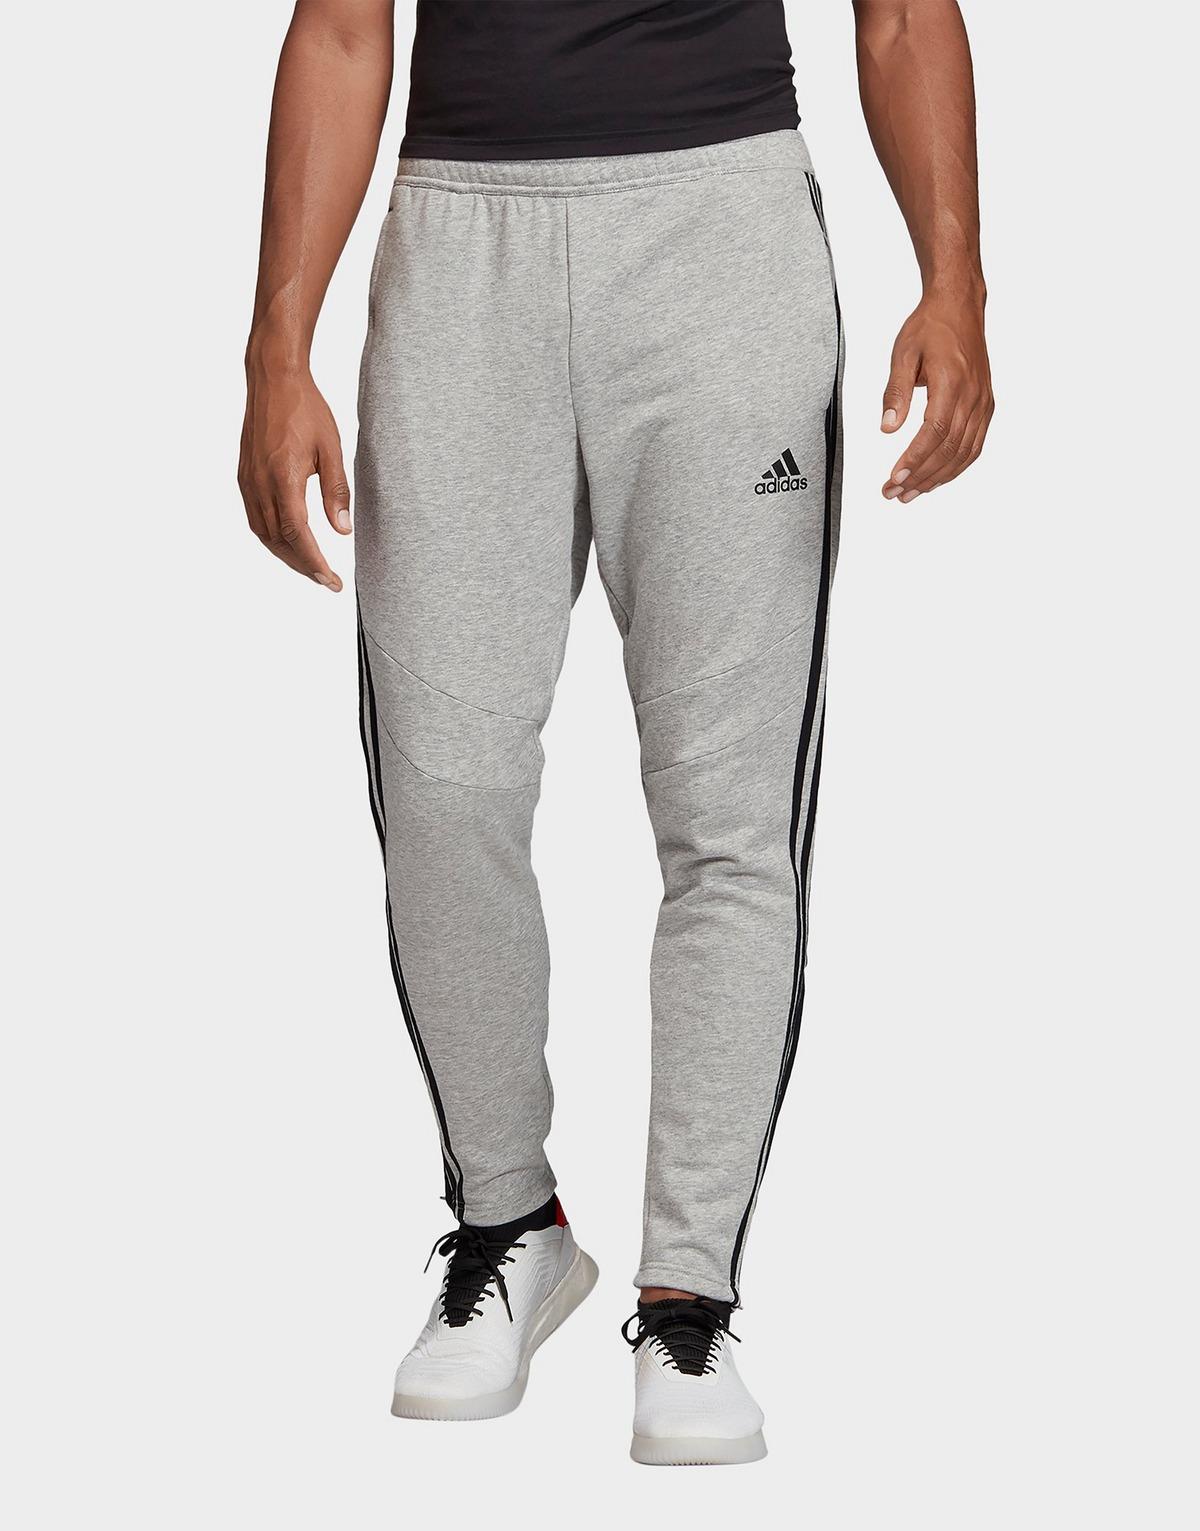 adidas Originals Tiro 19 French Terry Tracksuit Bottoms in Gray for Men ...